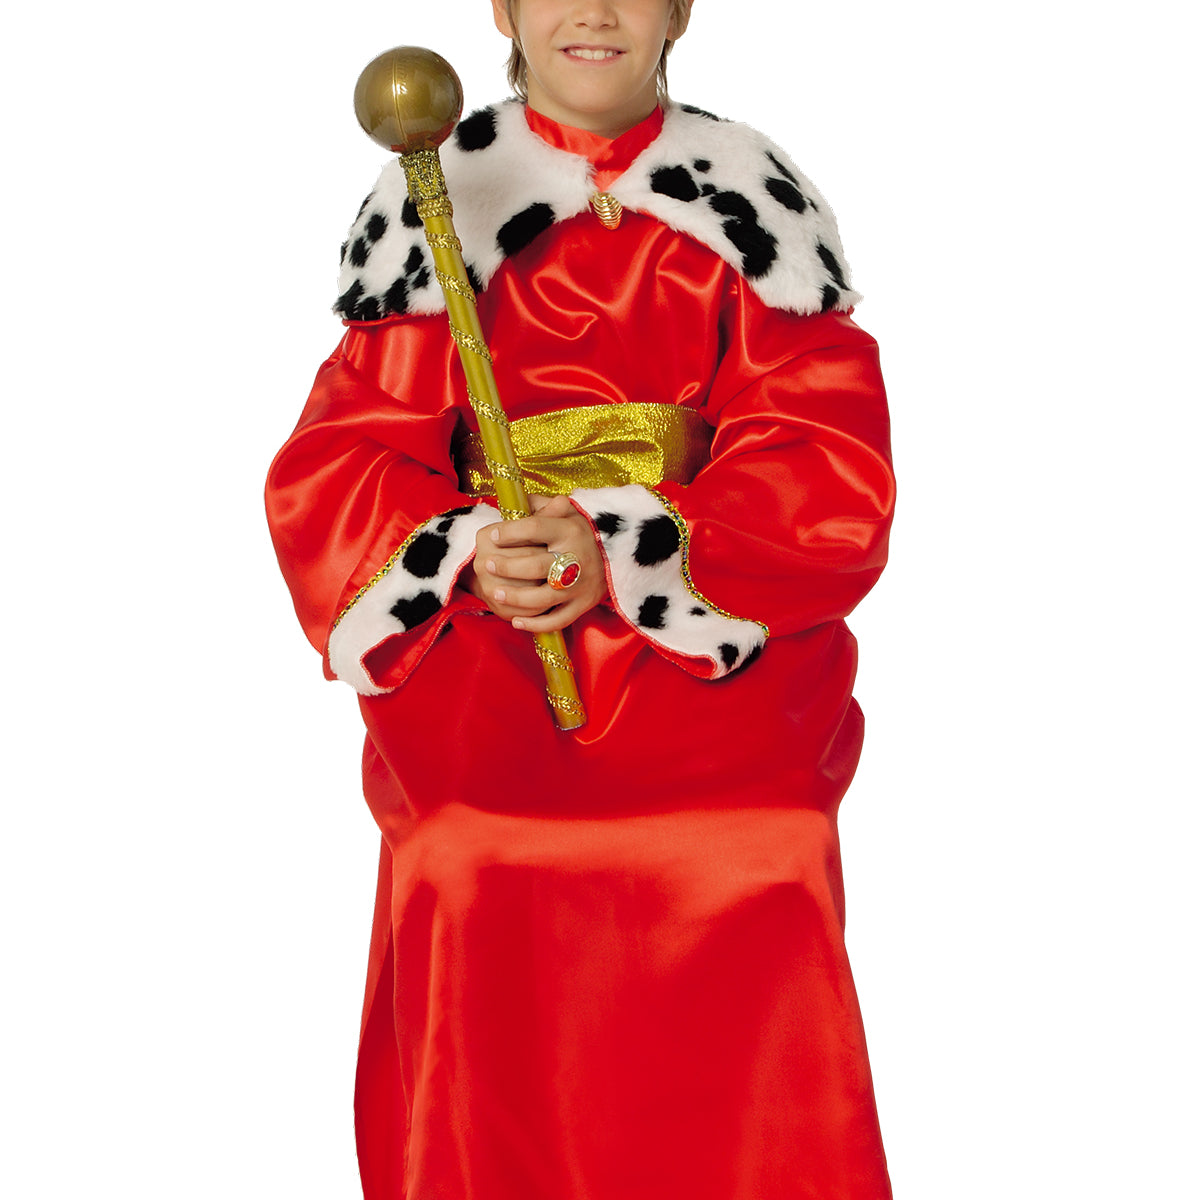 Wicked Costumes Deluxe Medieval King (8-10) Large